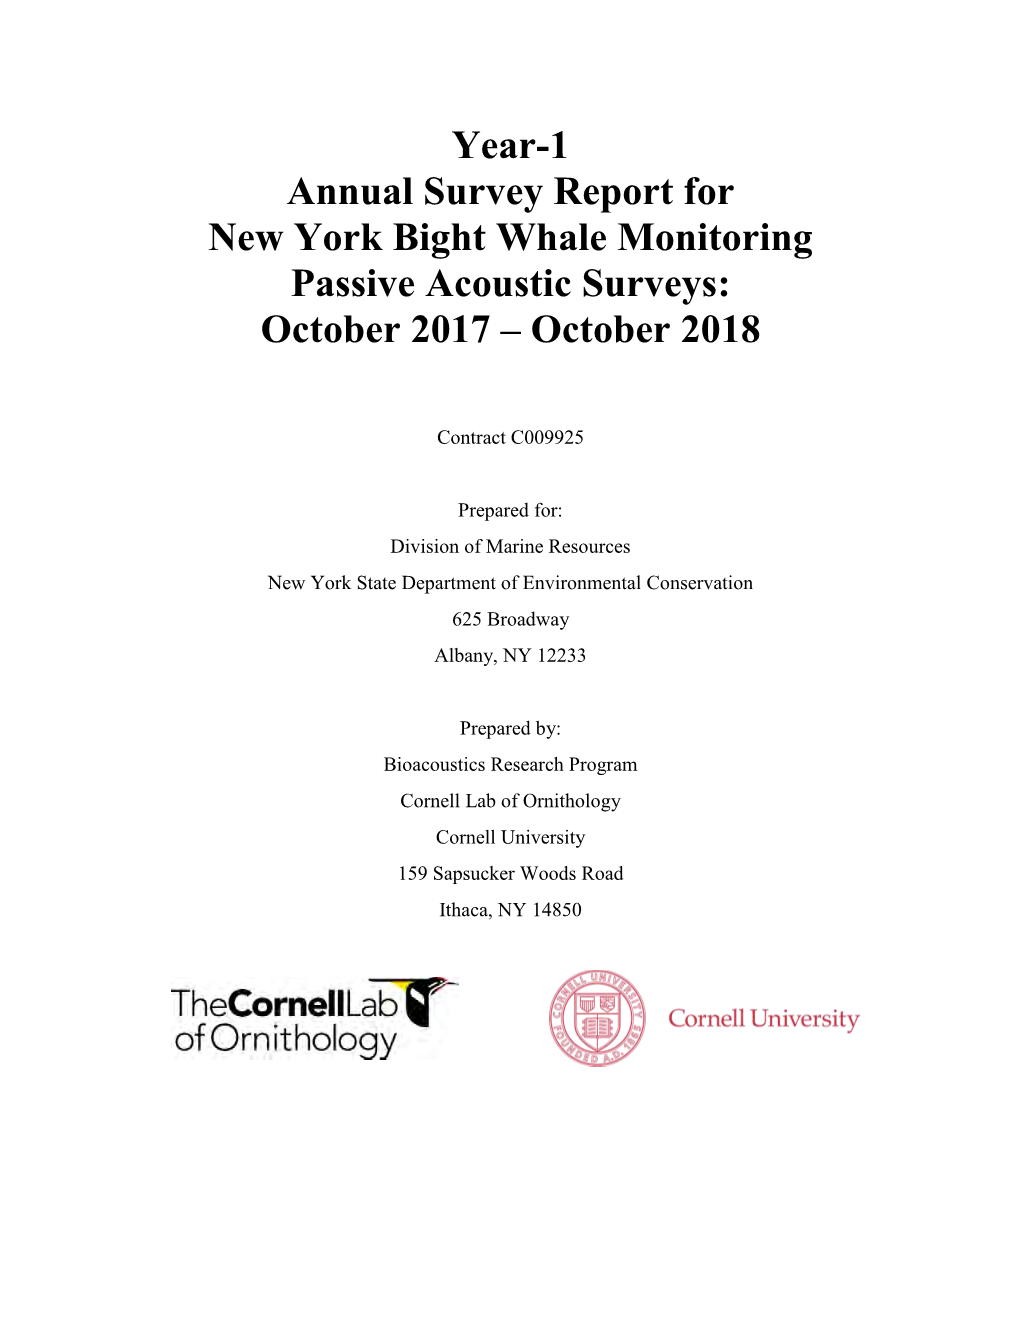 Year-1 Annual Survey Report for New York Bight Whale Monitoring Passive Acoustic Surveys: October 2017 – October 2018